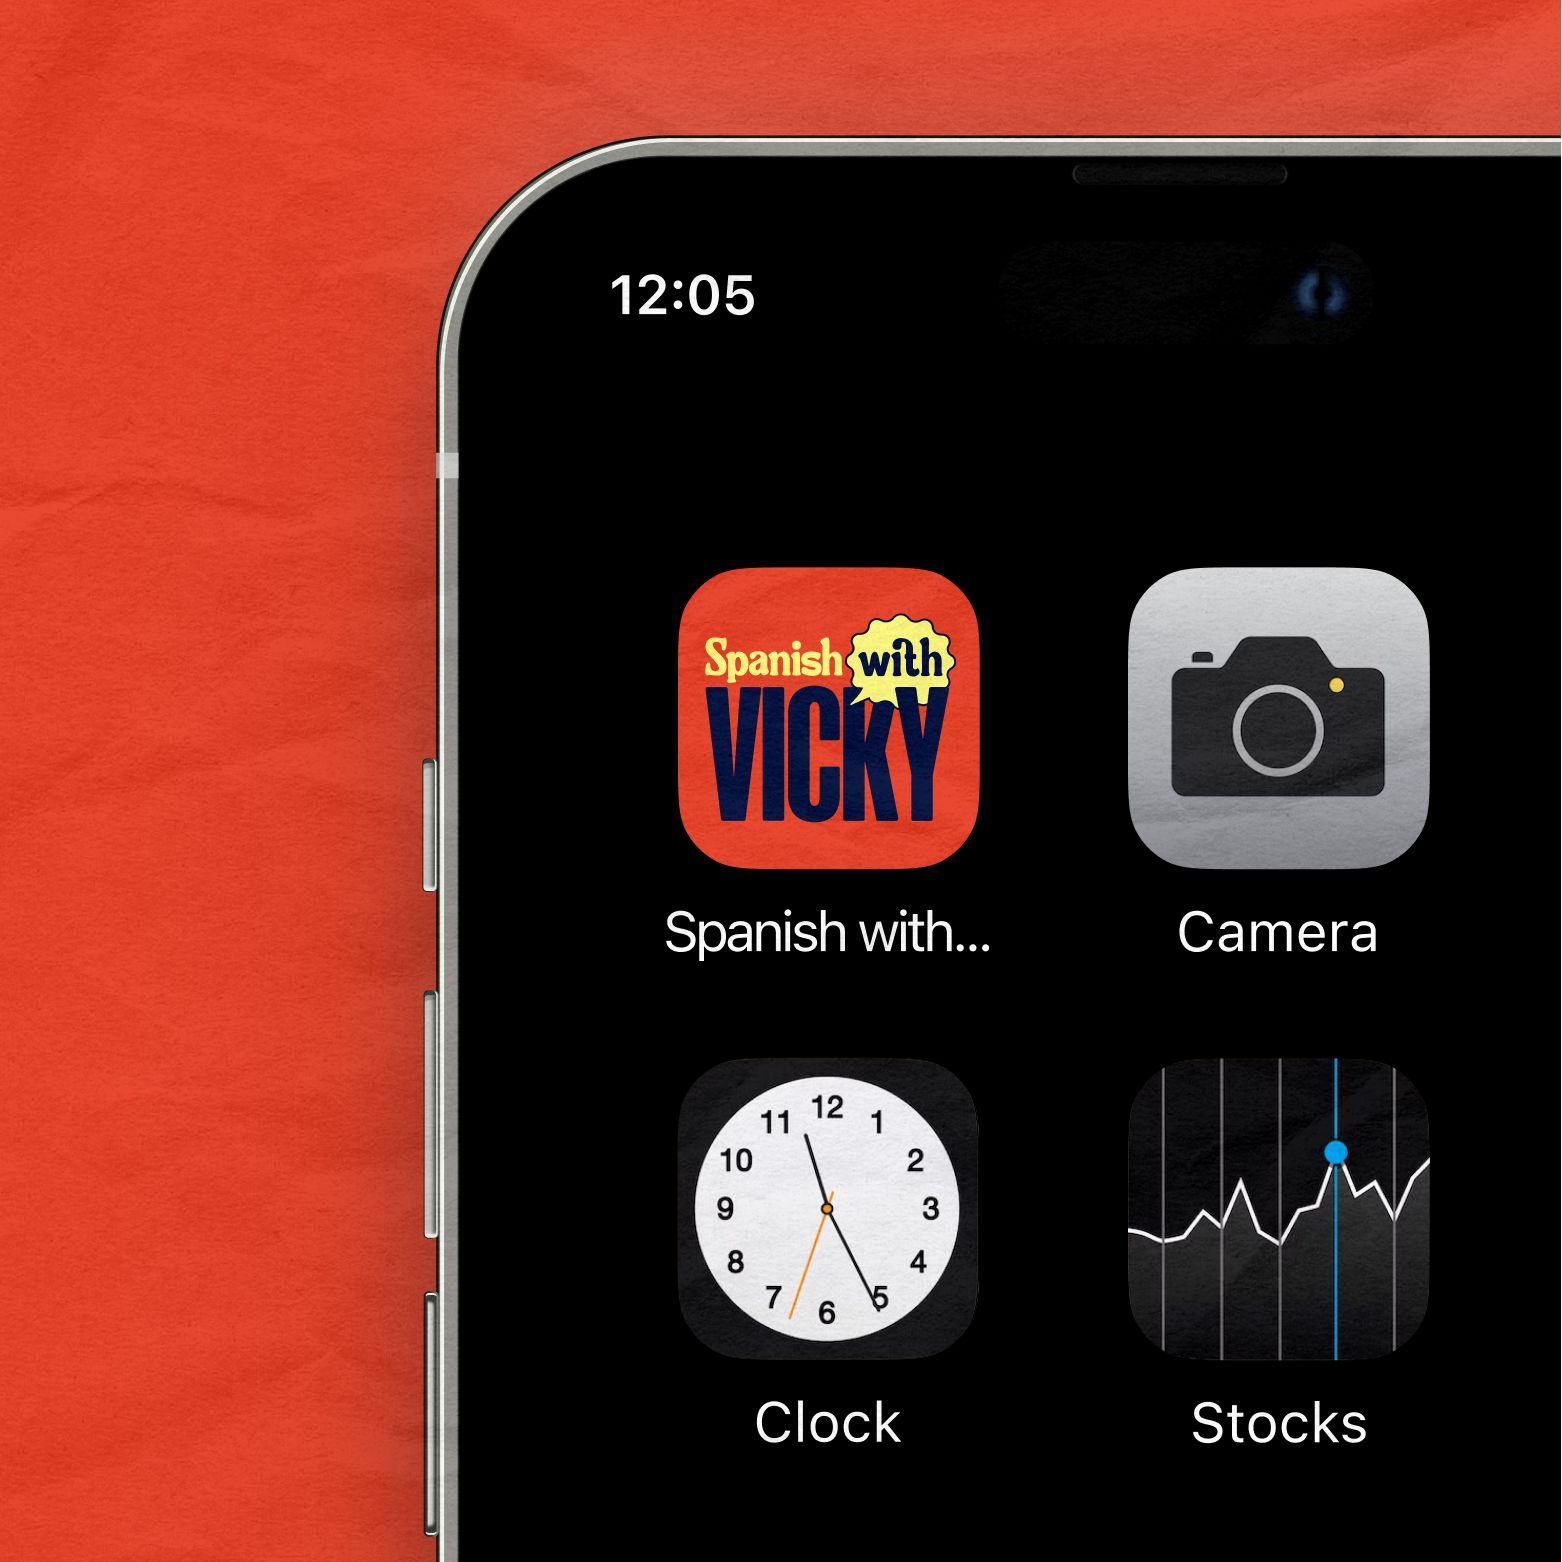 Spanish with Vicky app icon